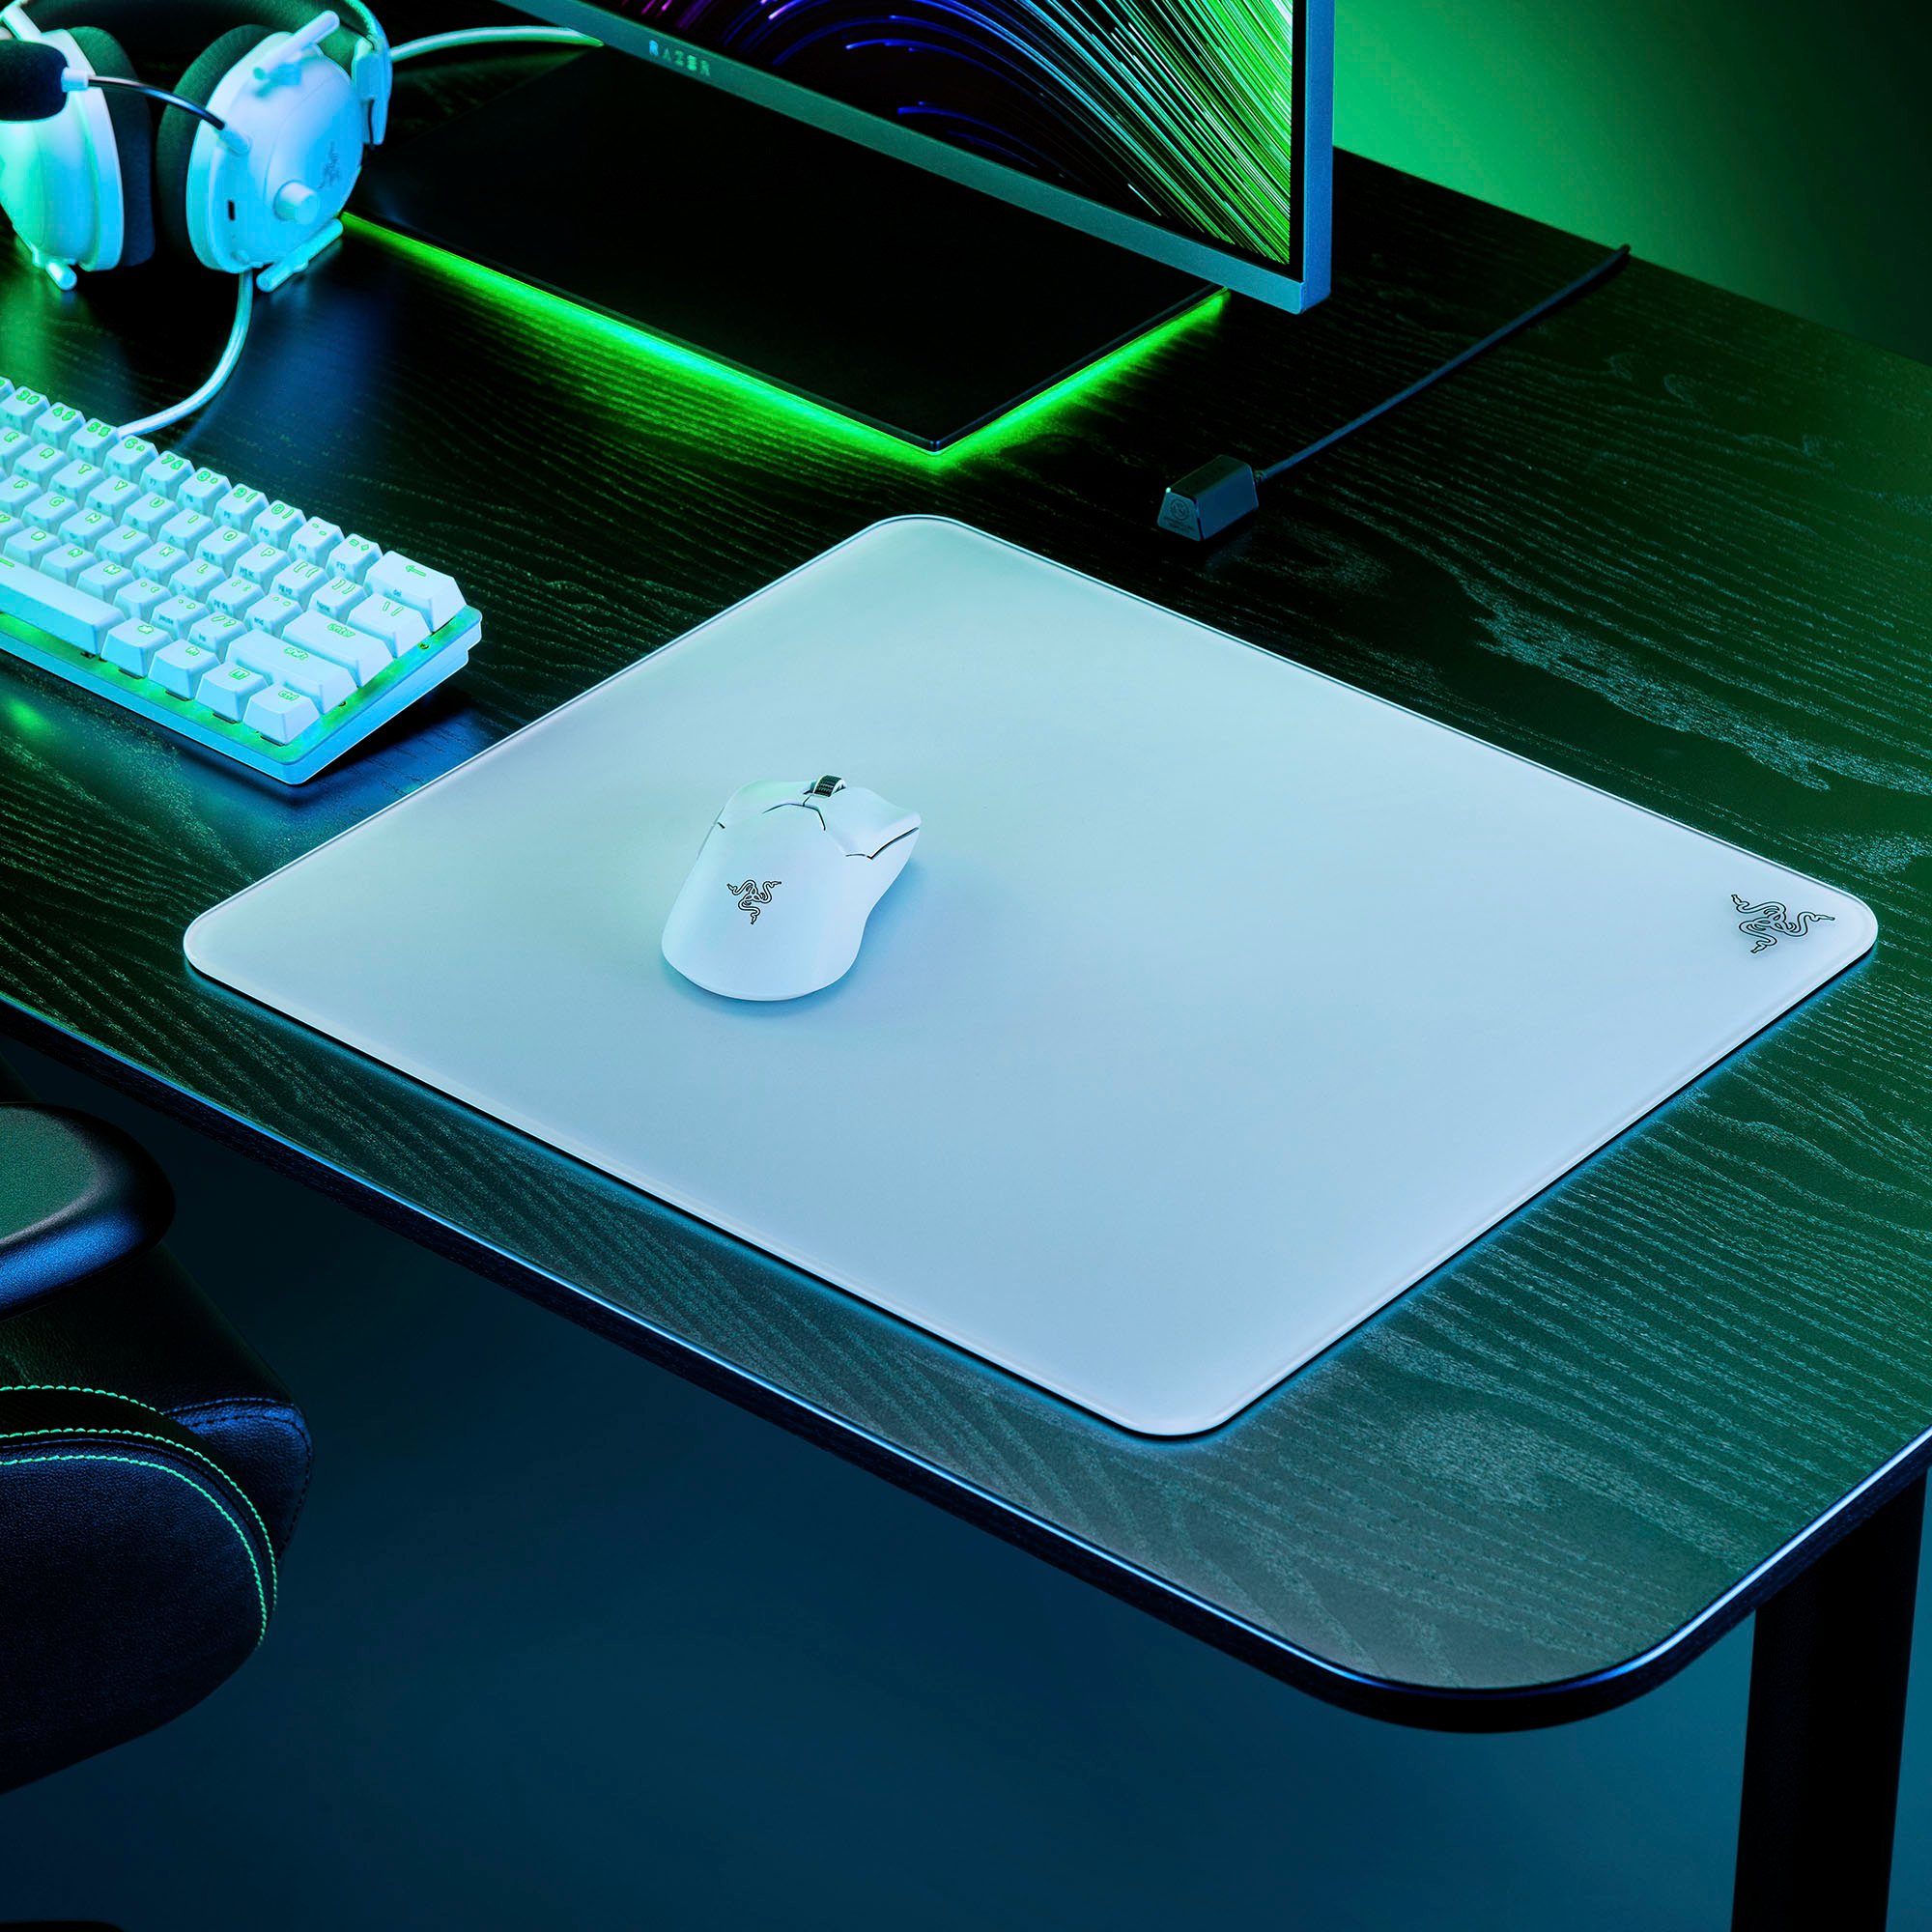 Razer - Atlas Tempered Glass Gaming Mouse Mat - White Edition